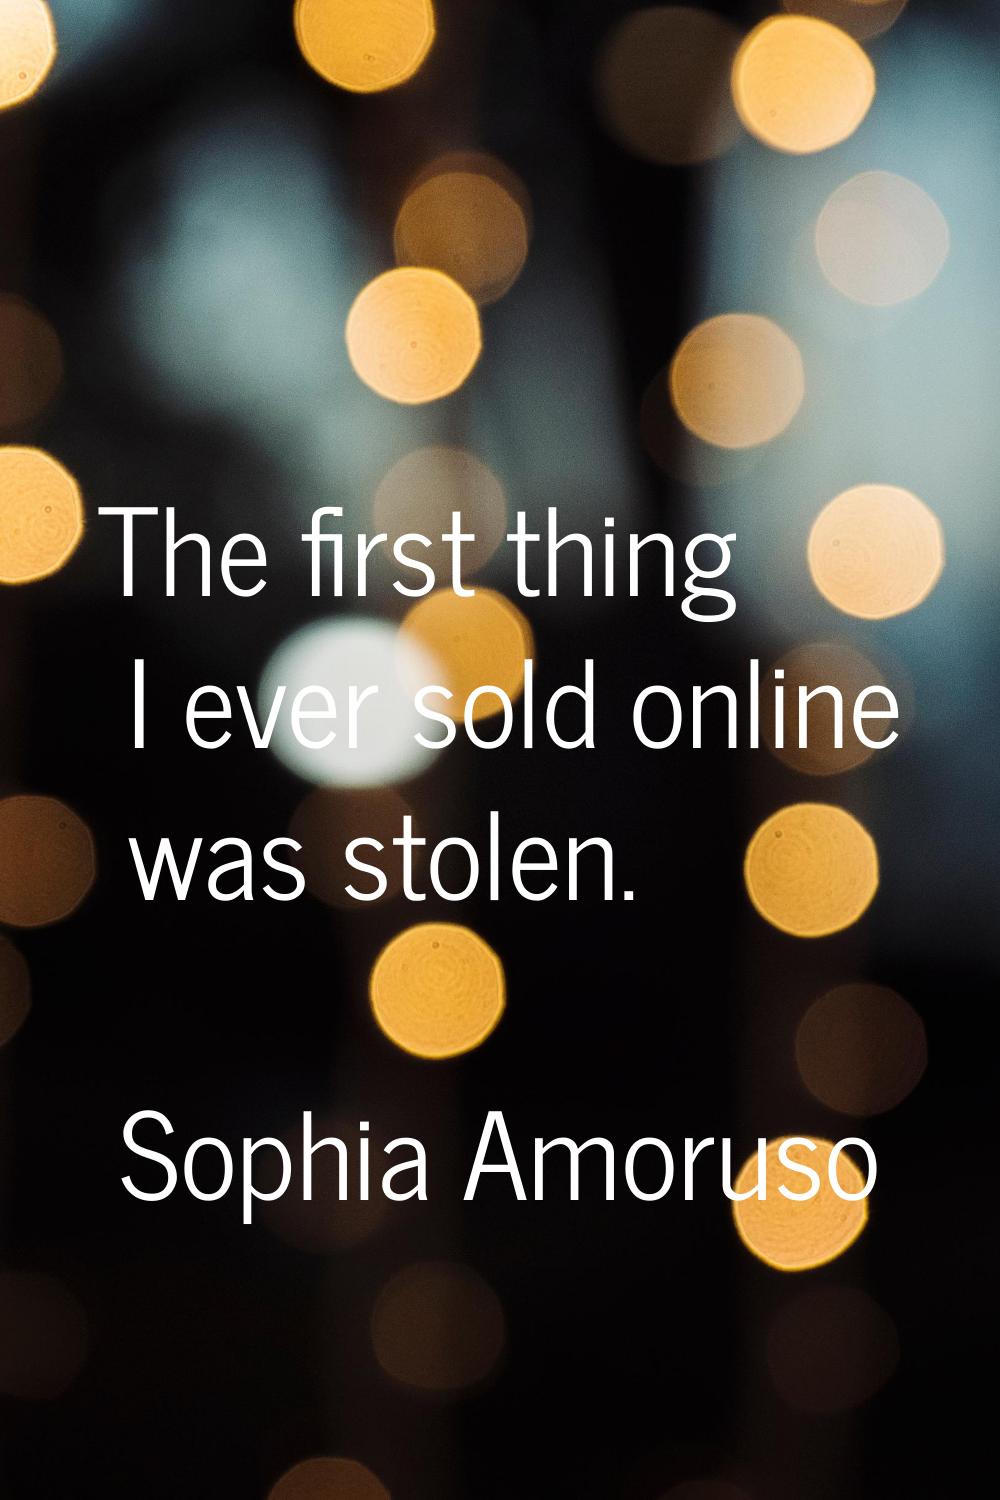 The first thing I ever sold online was stolen.